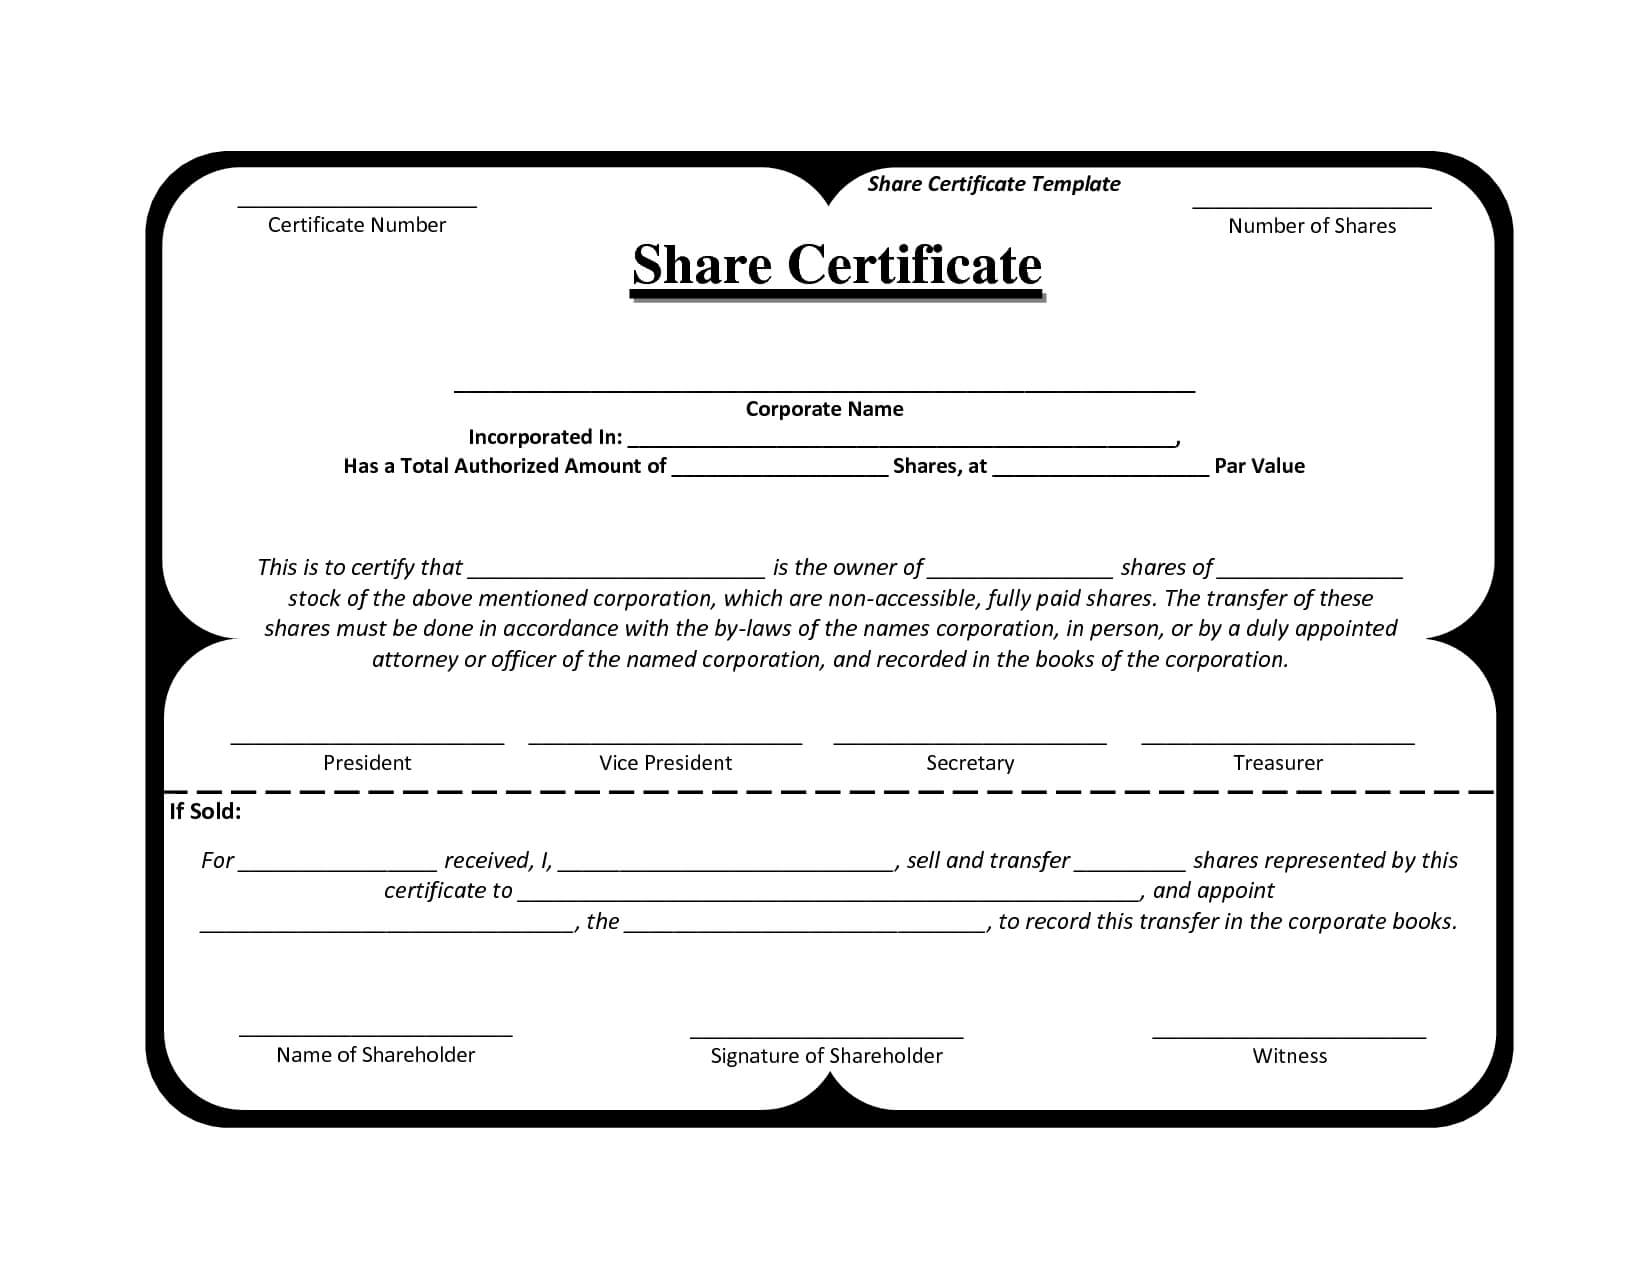 Template Share Certificate Rbscqi9V | Share Certificate In With Template Of Share Certificate